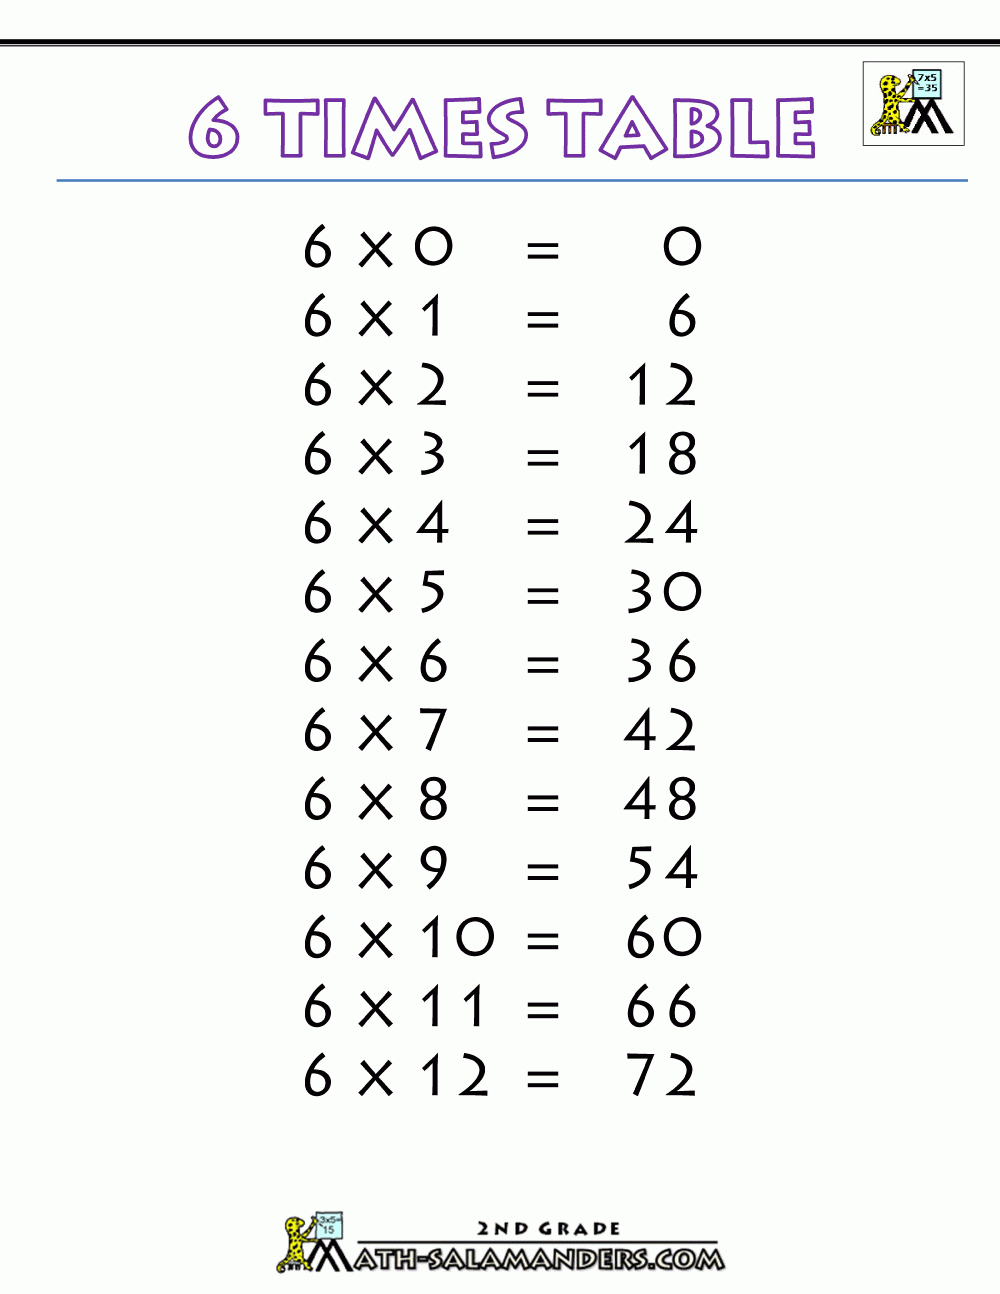 6 Times Table in Printable Multiplication Facts 6